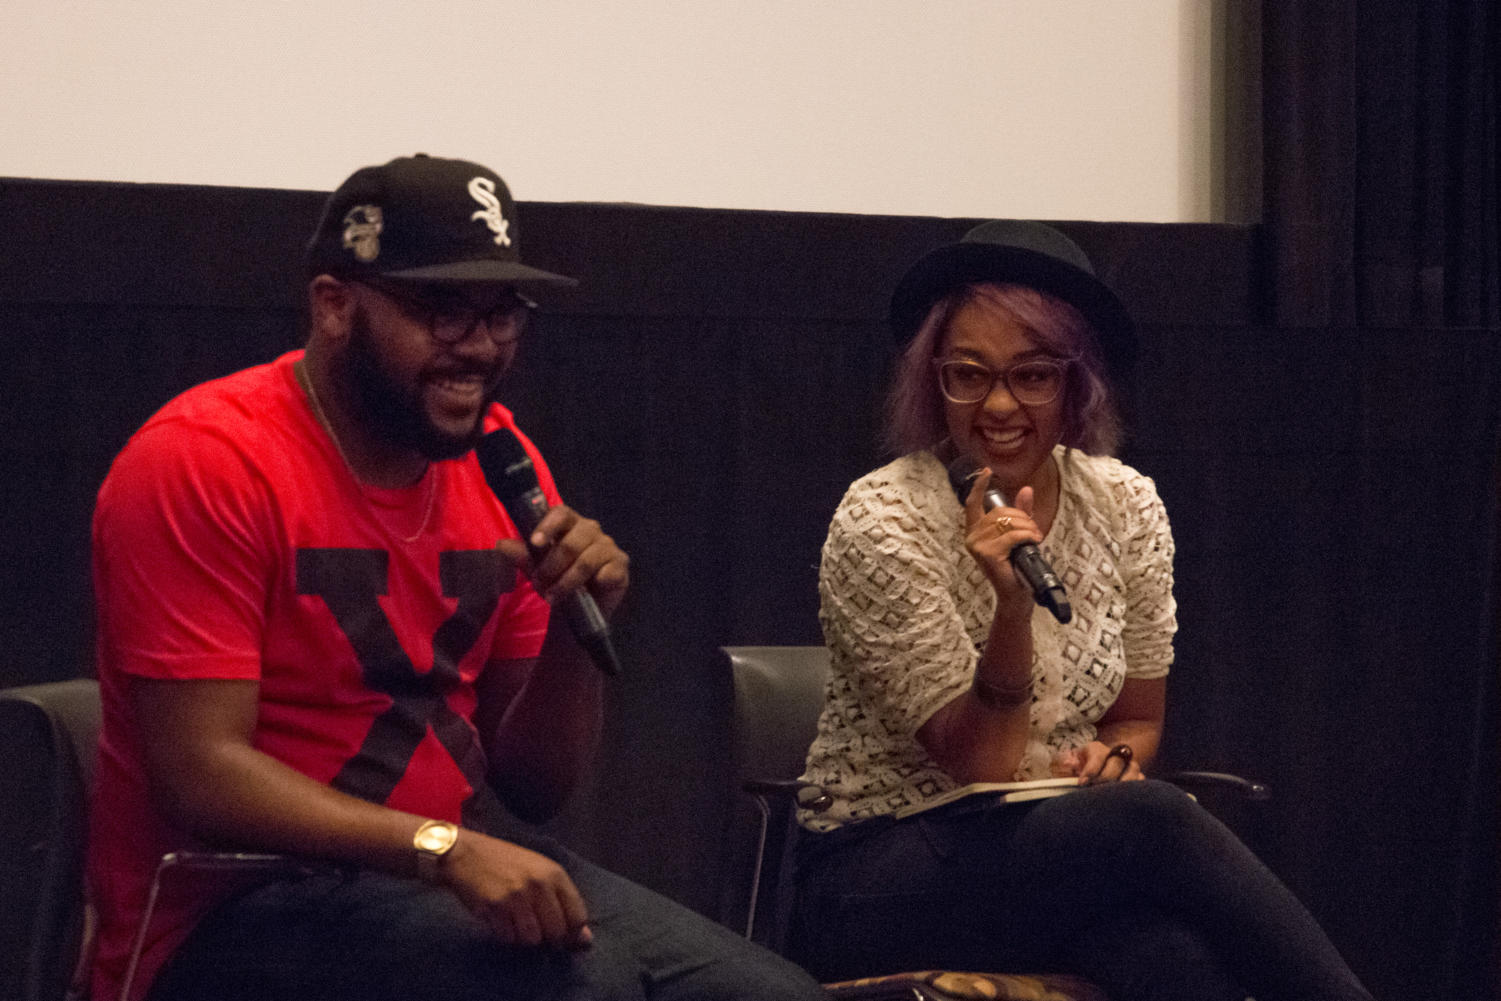 Nate Marshall (left) and Eve Ewing (right) in conversation at the Chicago Book Expo.